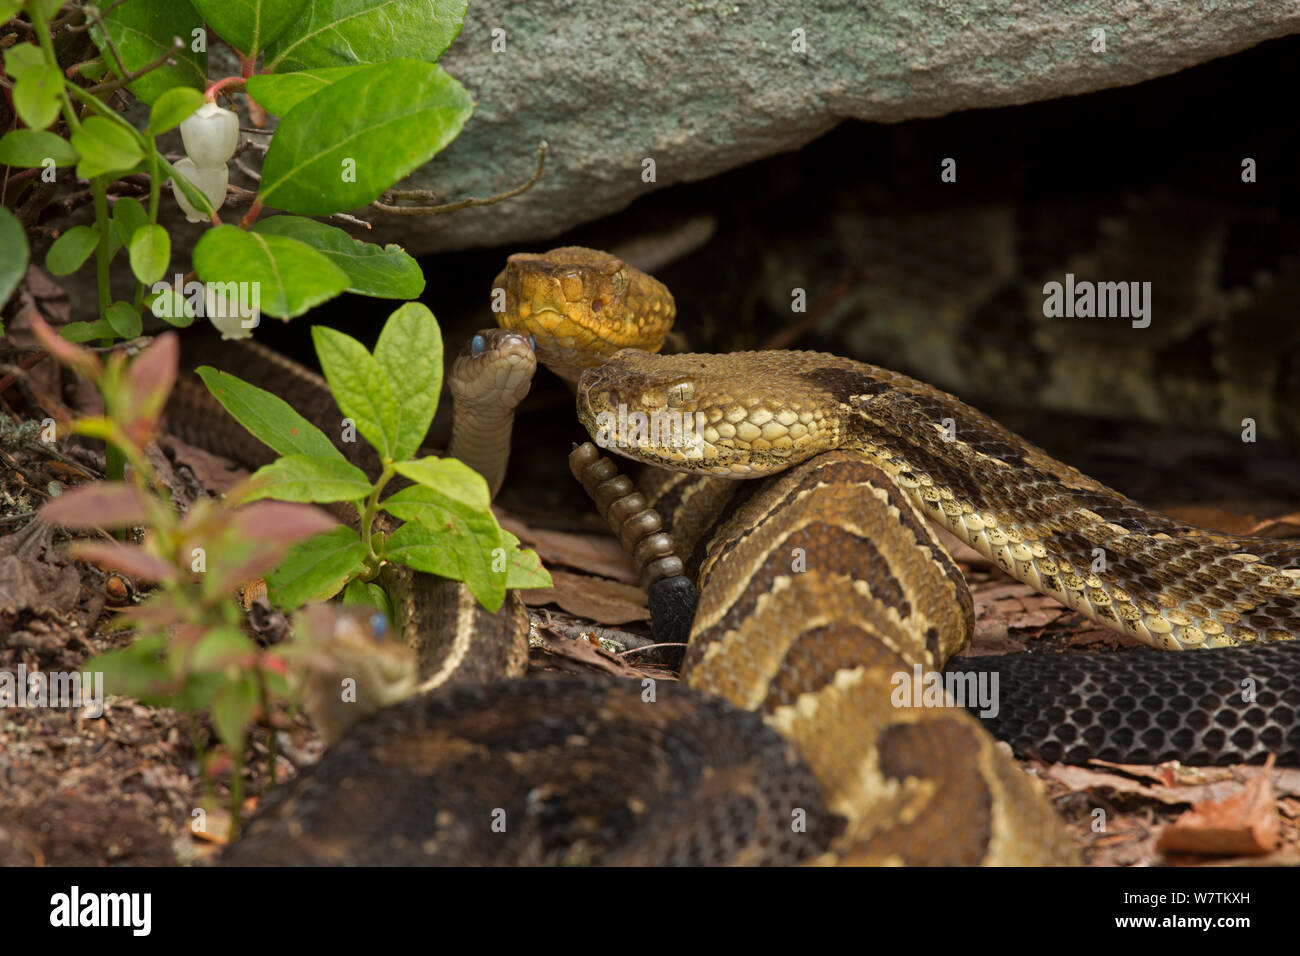 Timber rattlesnakes (Crotalus horridus) gravid females basking to bring young to term, Common gartersnake, (Thamnophis sirtalis) also visible in the group, Pennsylvania, USA, July. Stock Photo